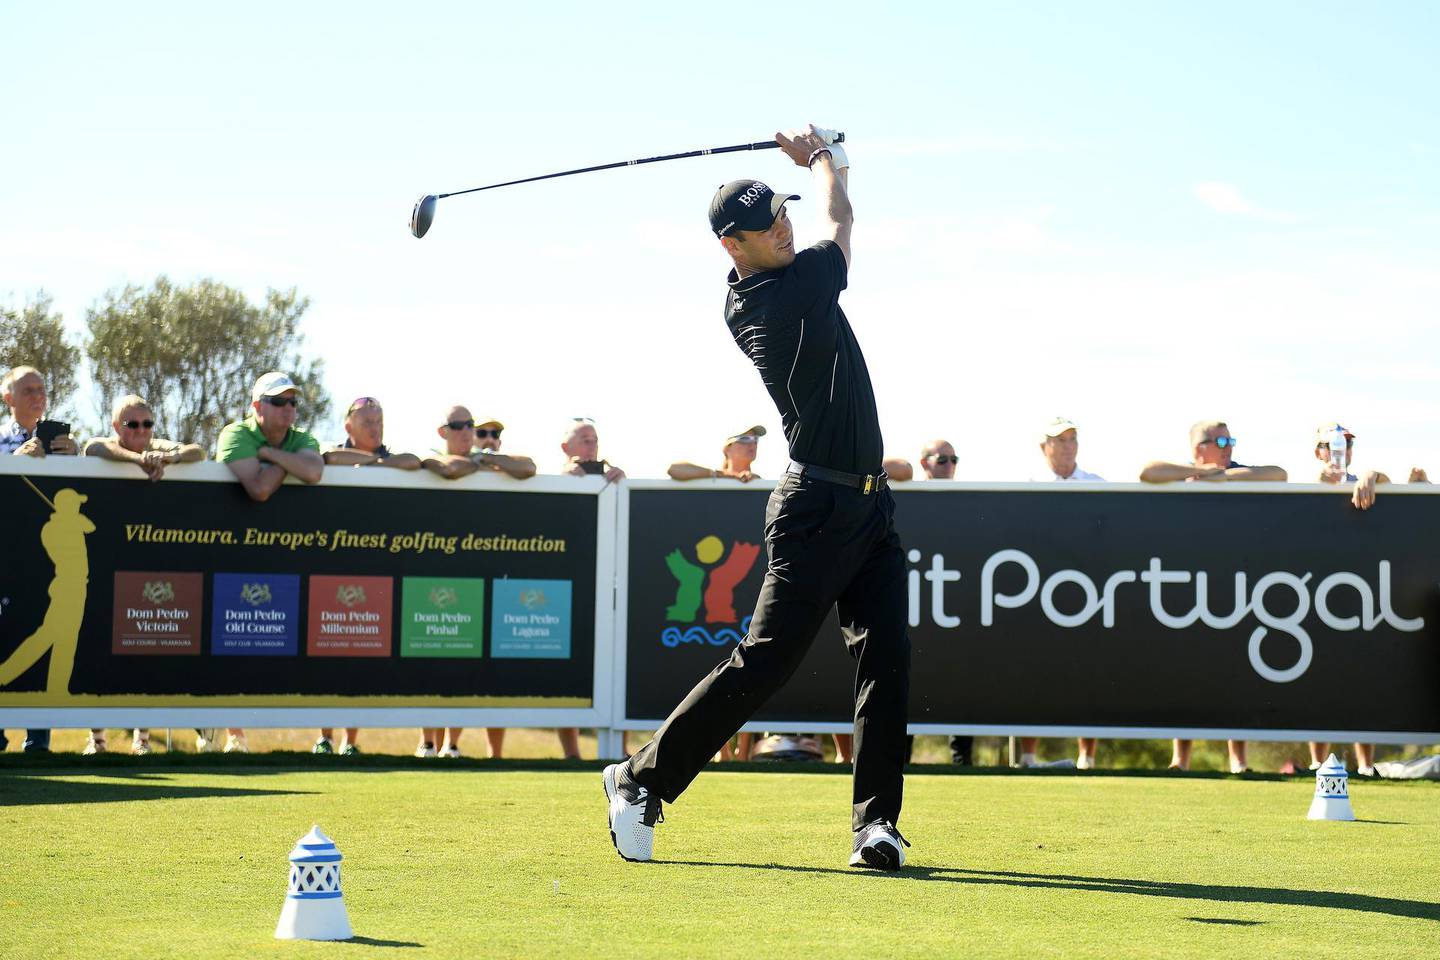 QUARTEIRA, PORTUGAL - OCTOBER 25: Martin Kaymer of Germany tees off on the 3rd hole  during Day two of the Portugal Masters at  Dom Pedro Victoria Golf Course on October 25, 2019 in Quarteira, Portugal. (Photo by Harry Trump/Getty Images)